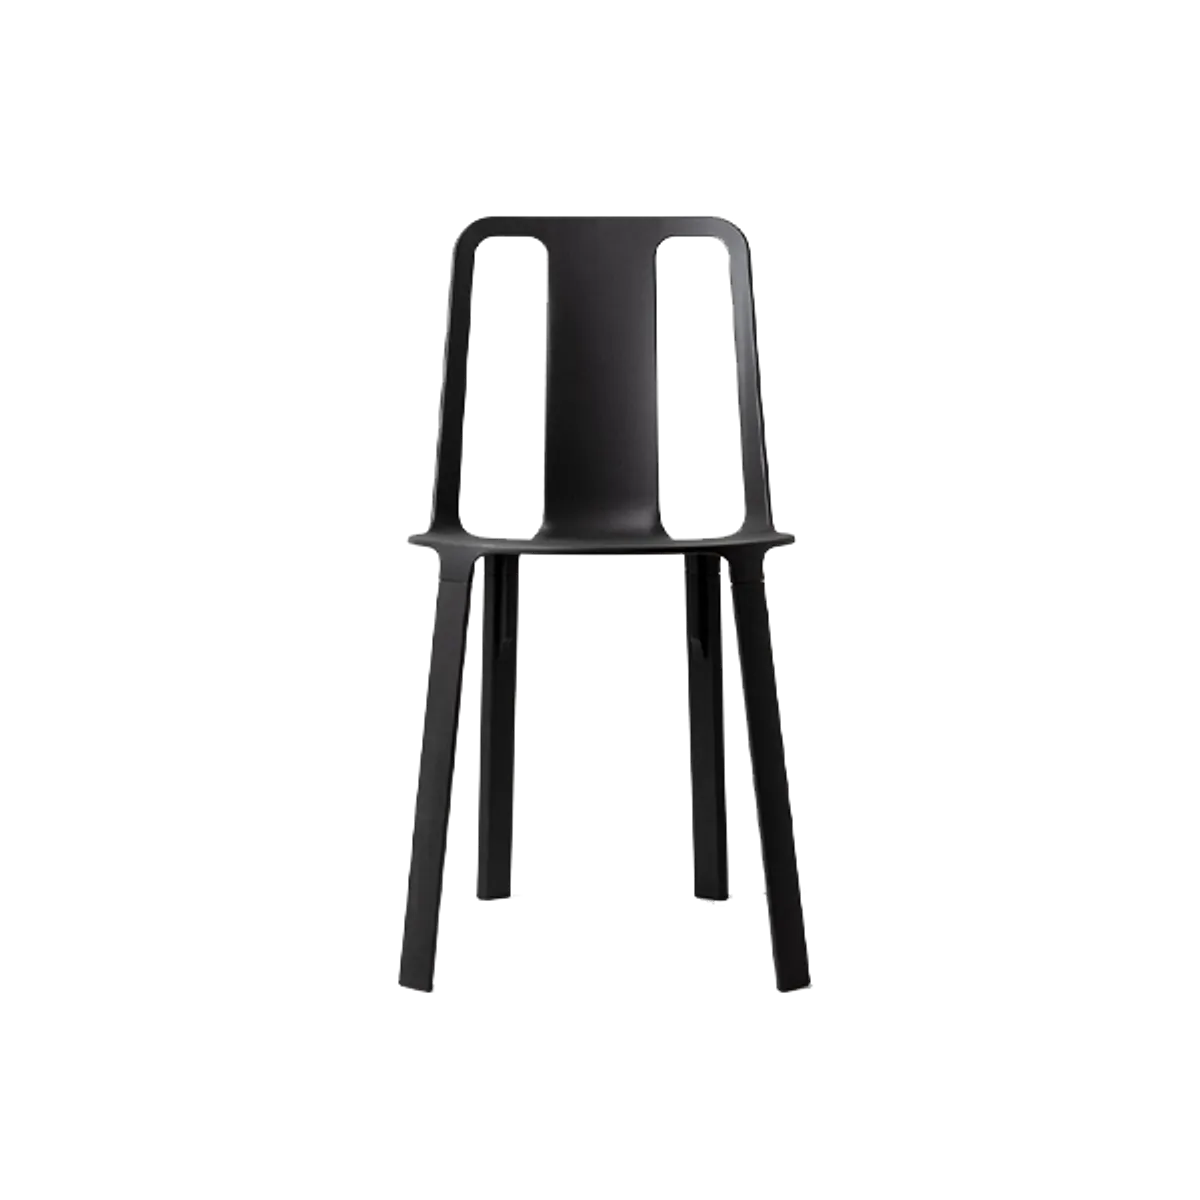 Web Vela Side Chair Inside Out Contracts